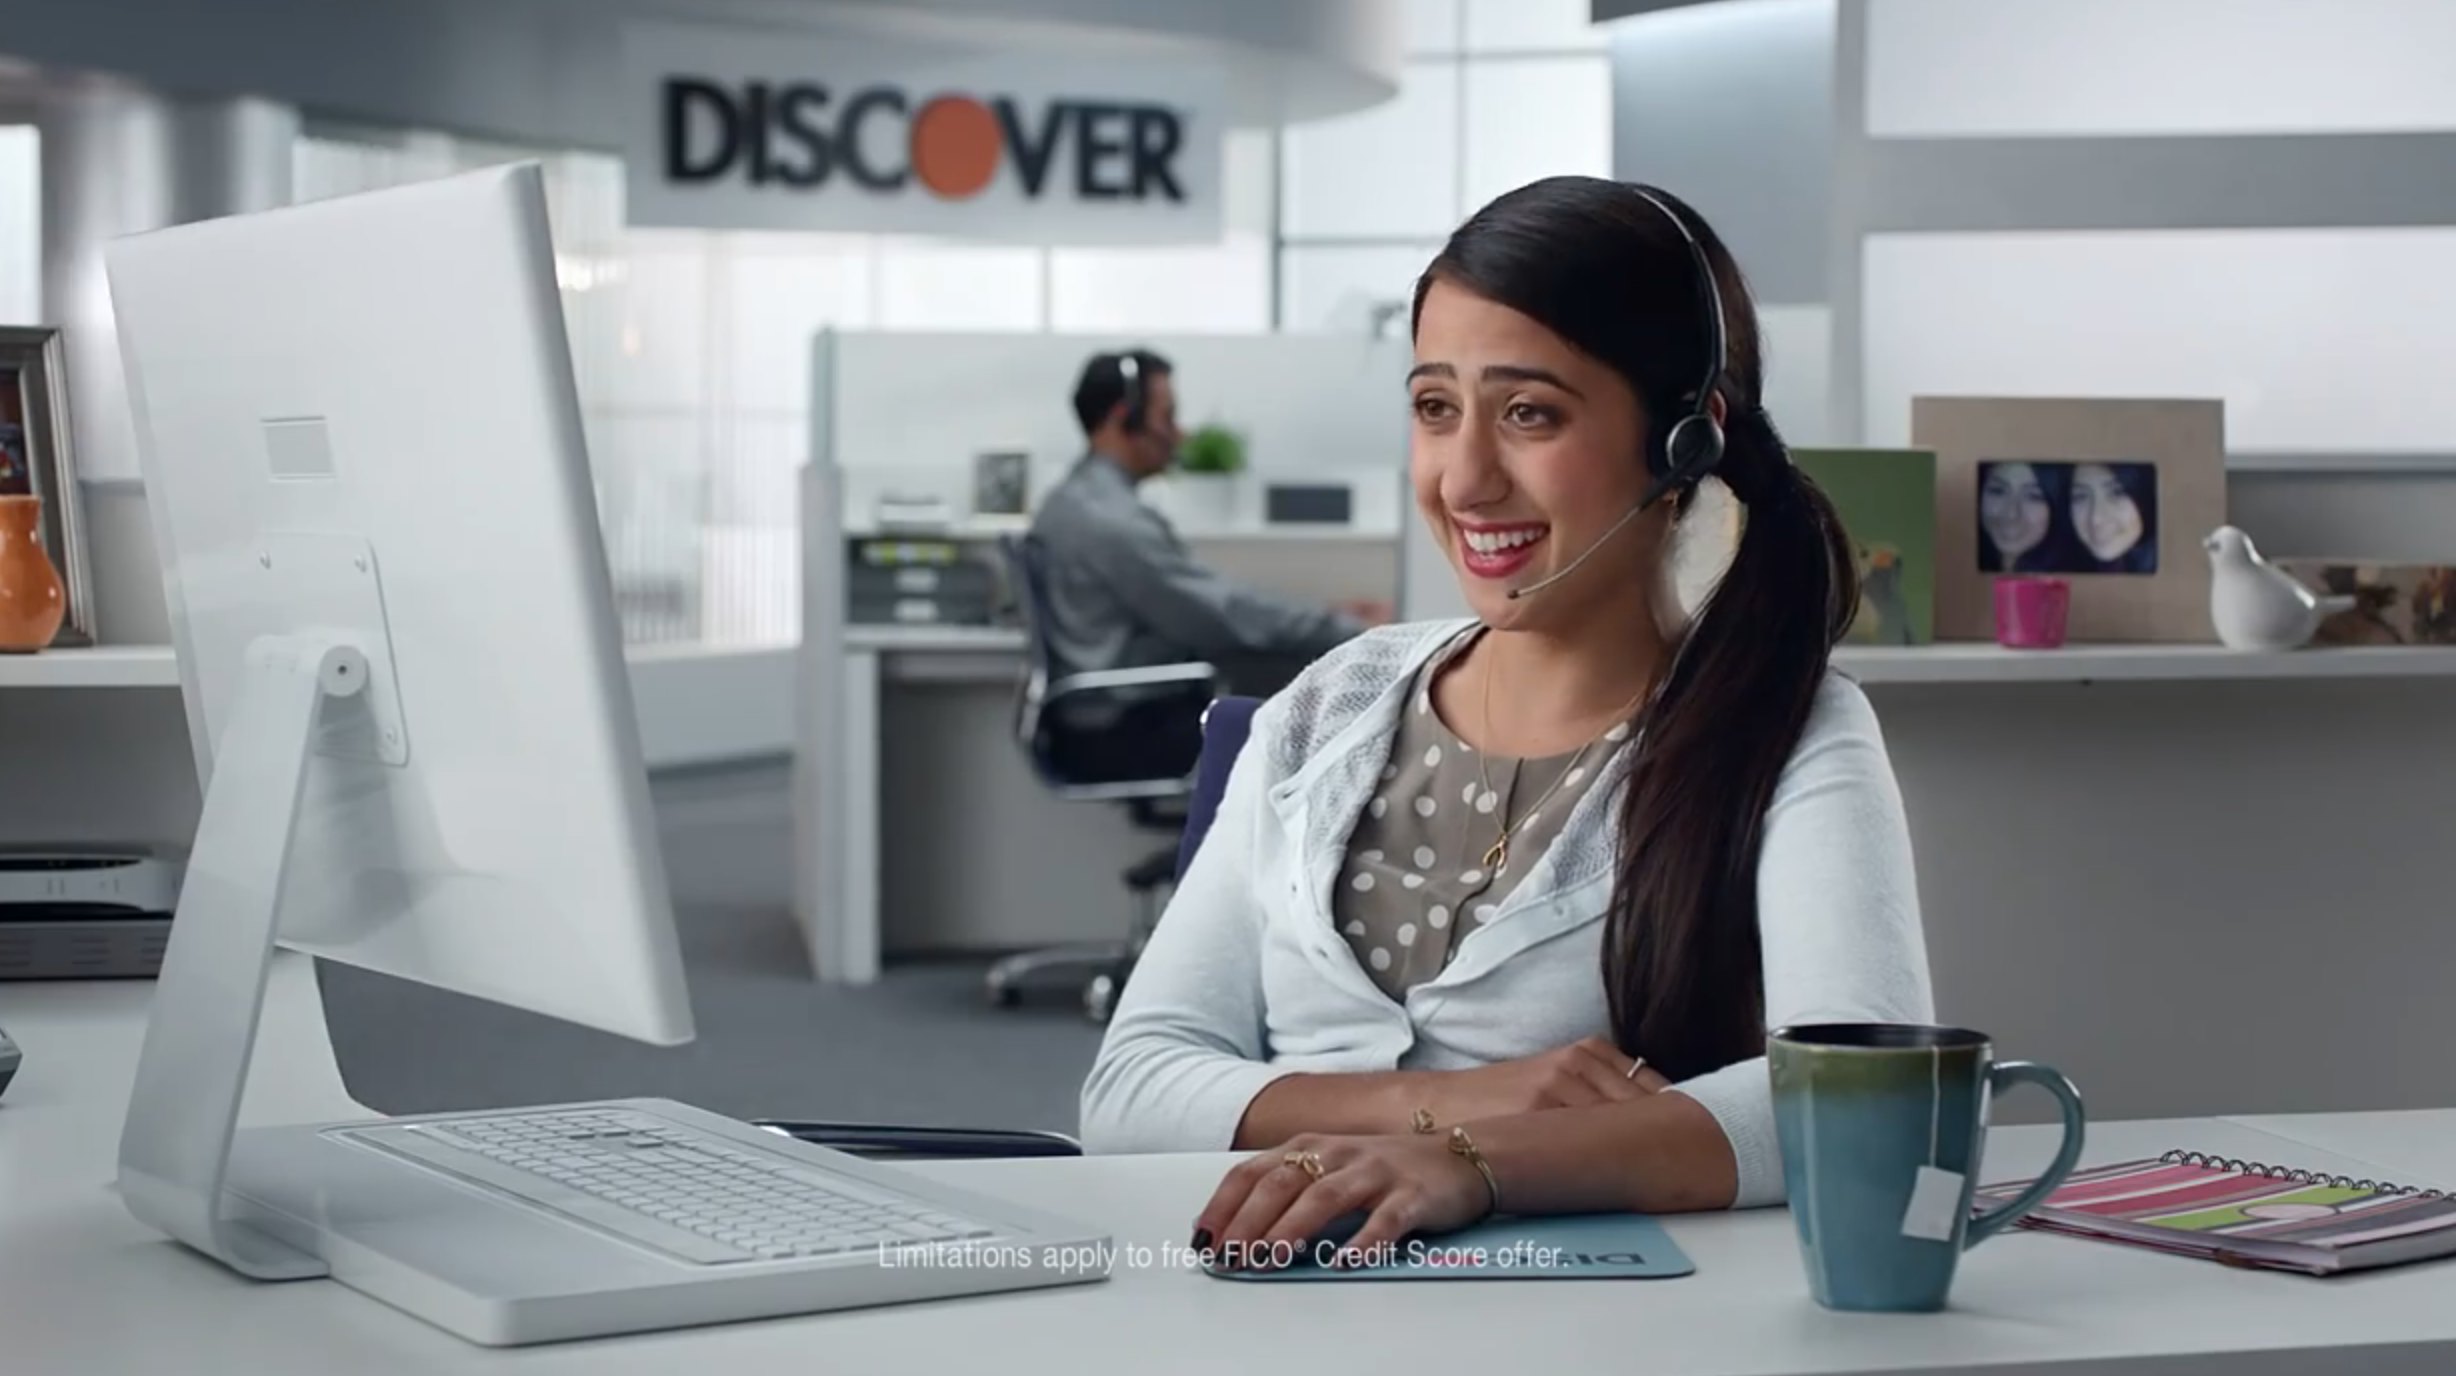 Discover Card Commercial Actors Saying No